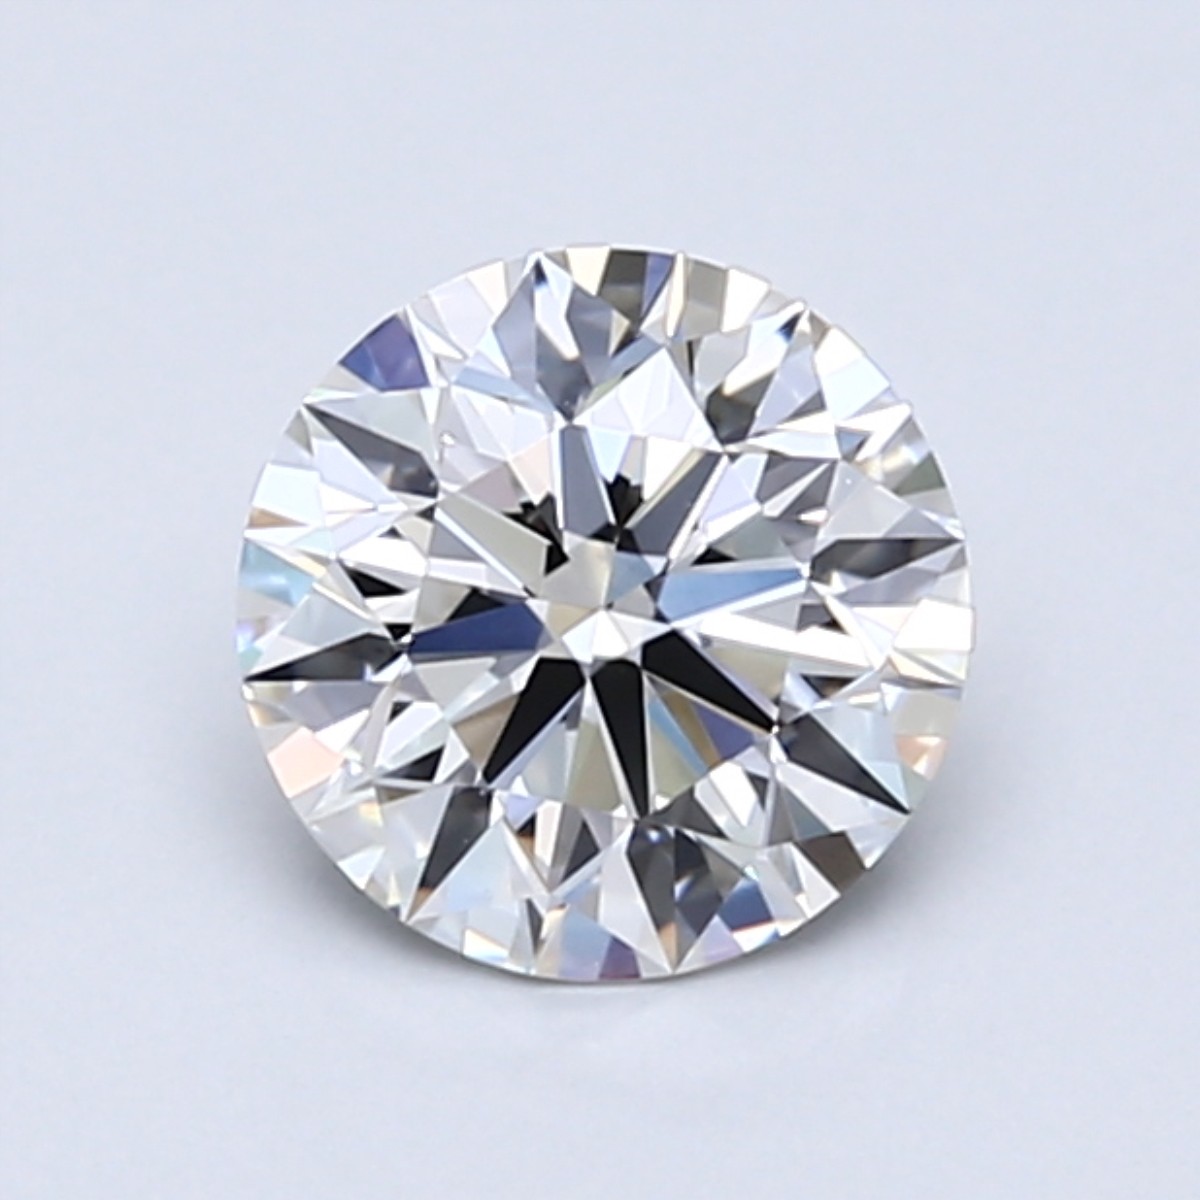 H Color Diamonds: Are They Worth It?